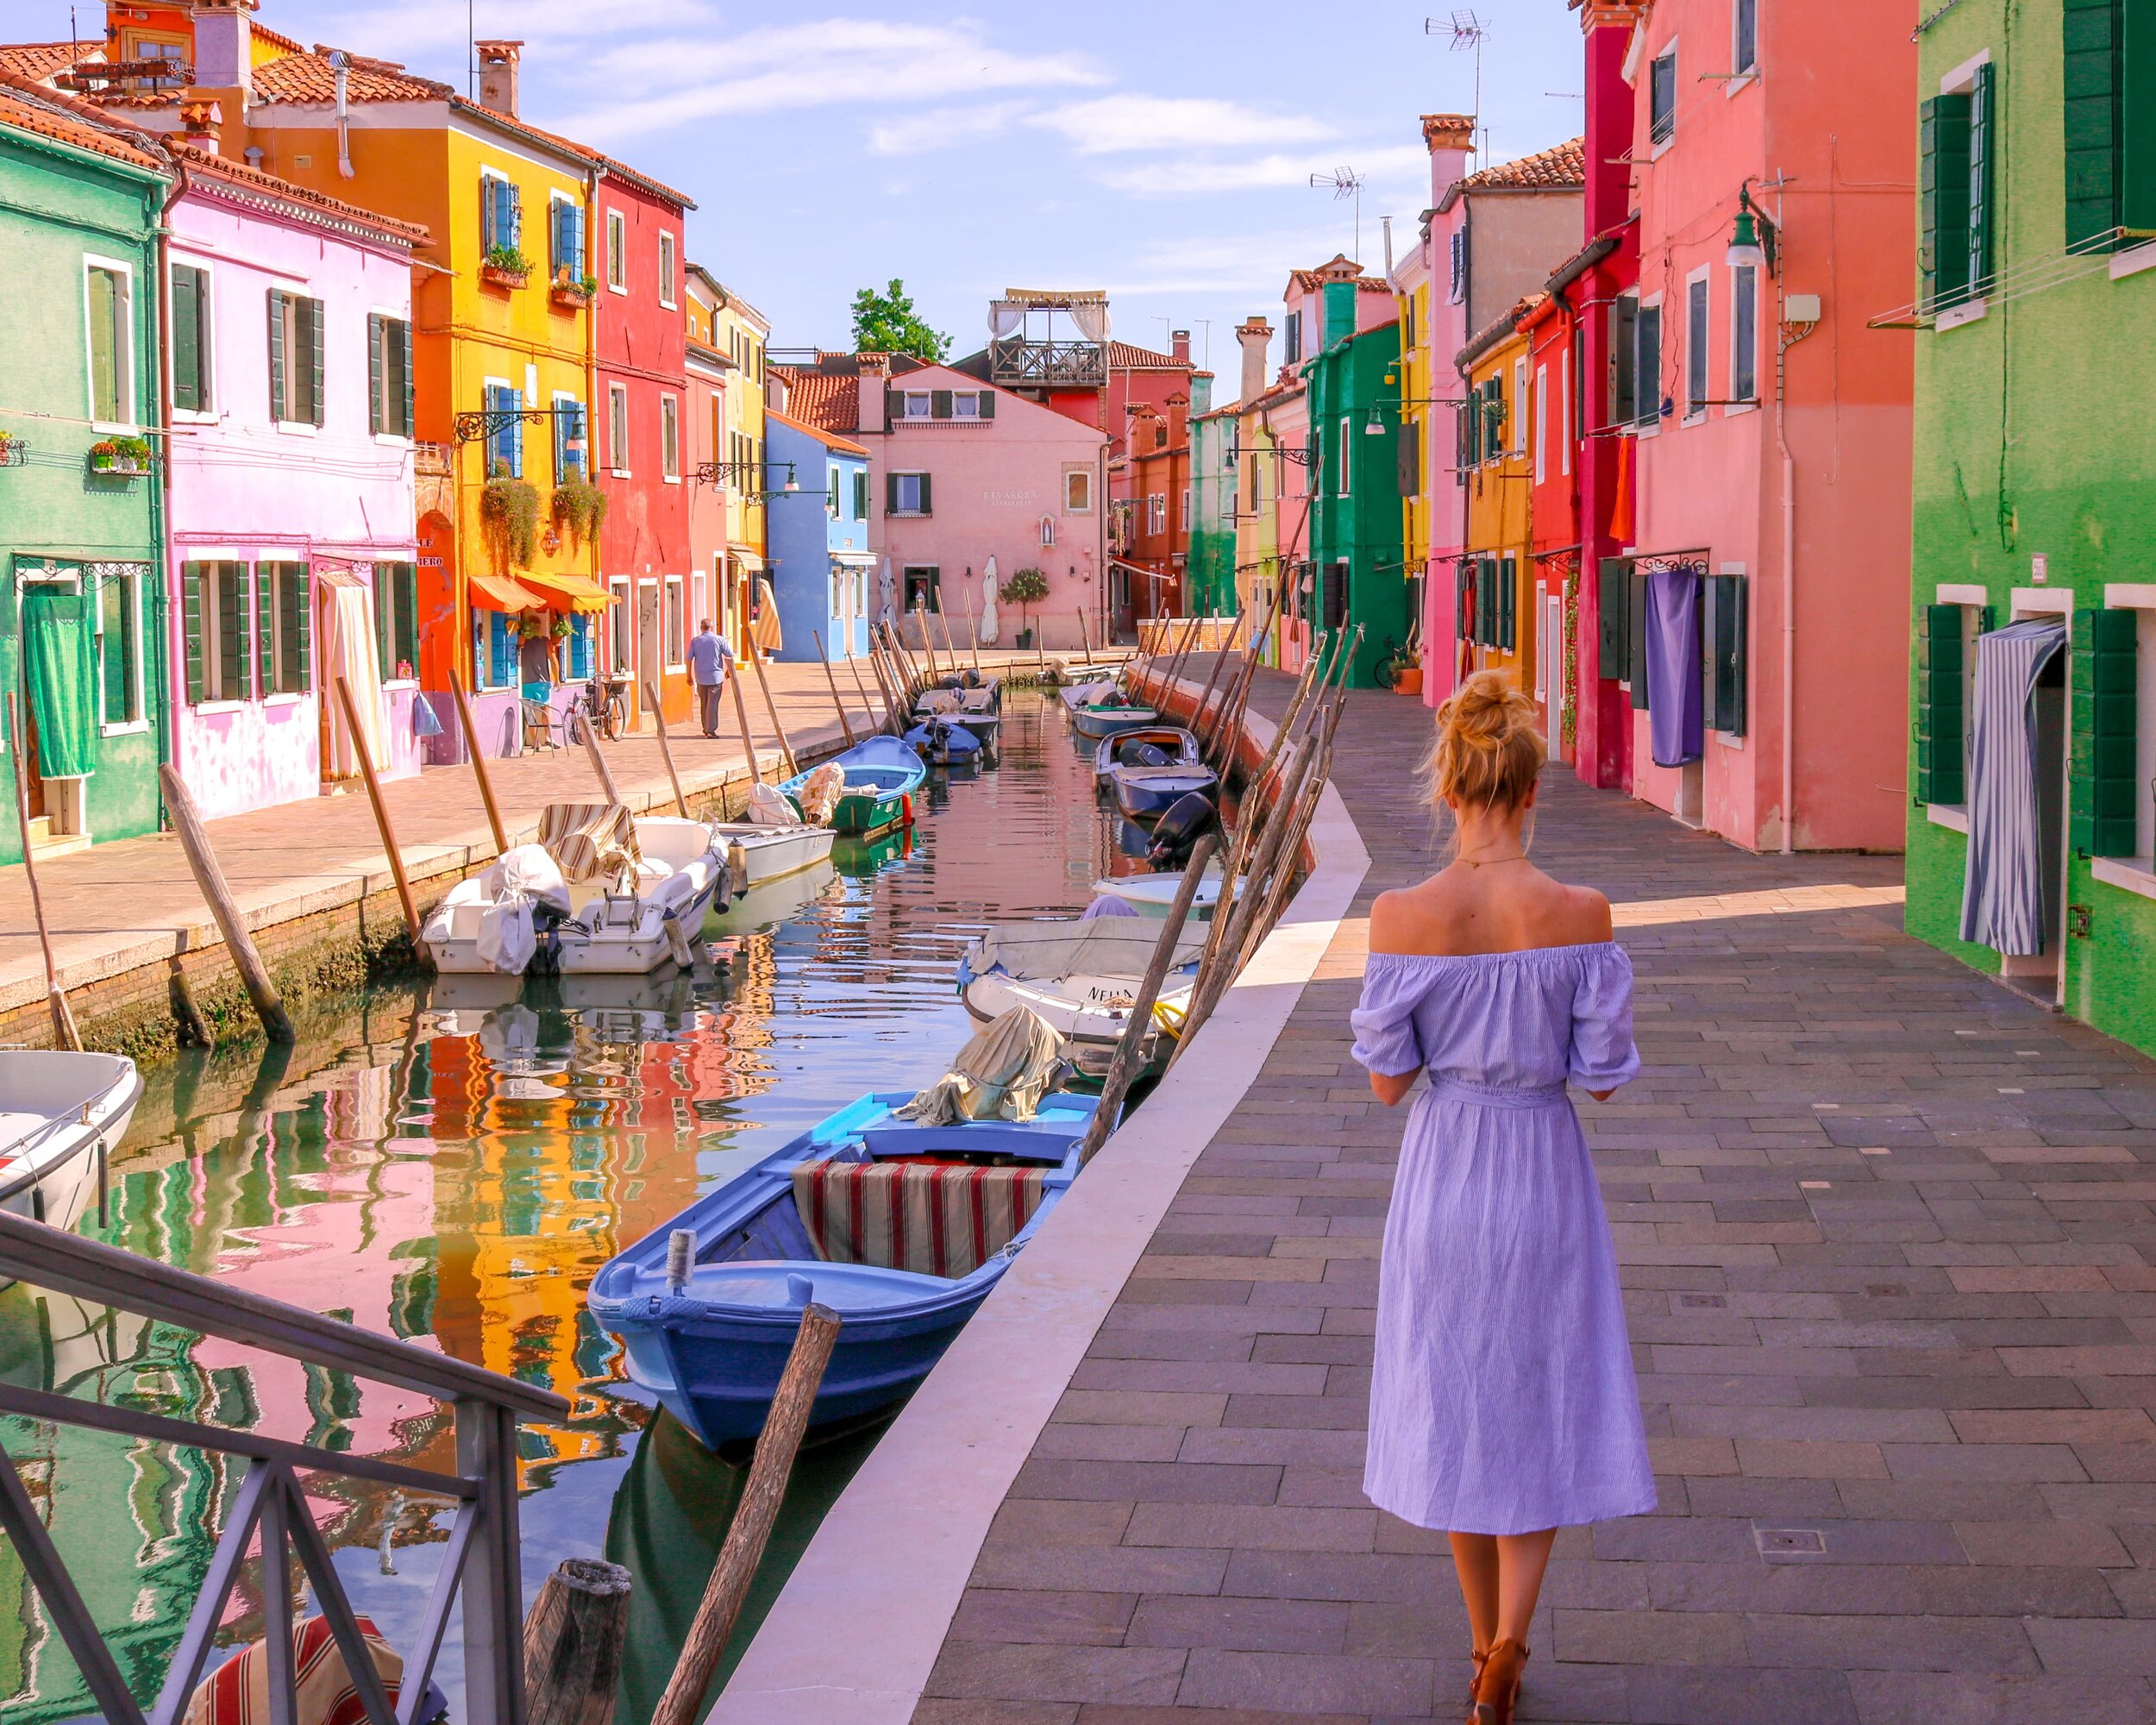 A girl in a blue dress walking along the side o fa pathway with many small boats docked in wather stretching down the middle of the pathway. Each side of the pathway is surrounded by many colourful houses